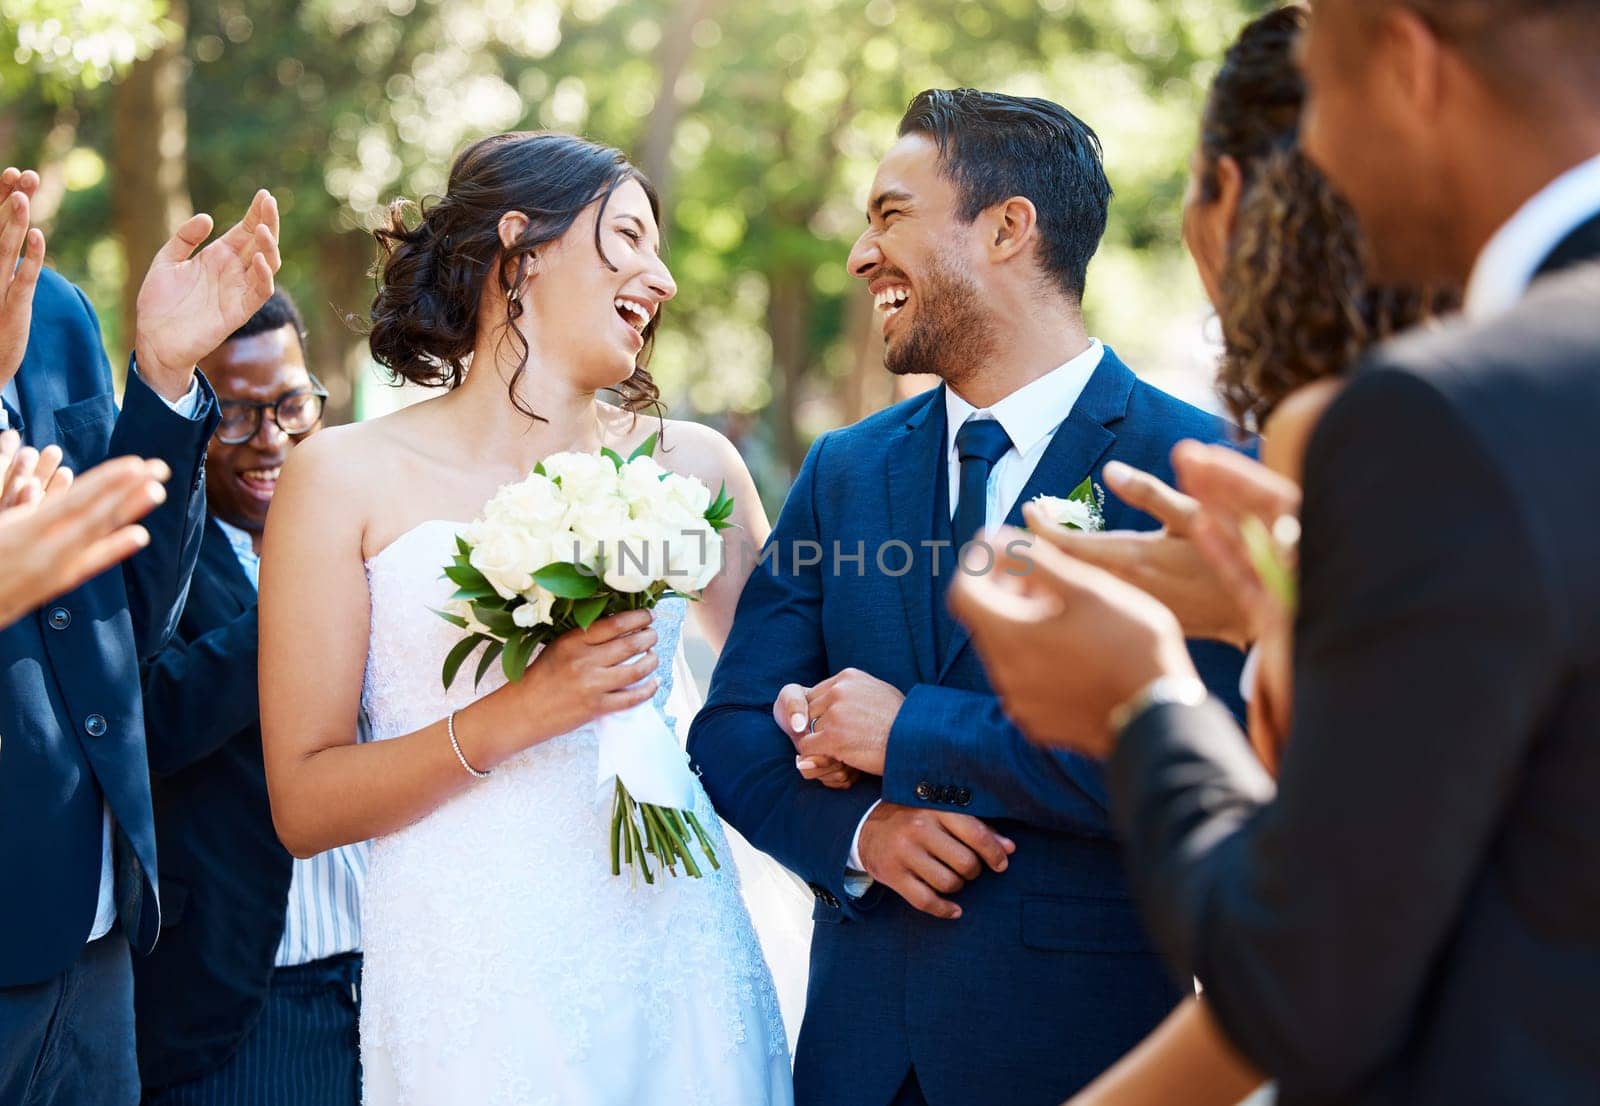 Wedding ceremony, couple and people clapping hands in celebration of love, romance and union. Happy, smile and bride with bouquet and groom walking by guests cheering for marriage at an outdoor event by YuriArcurs